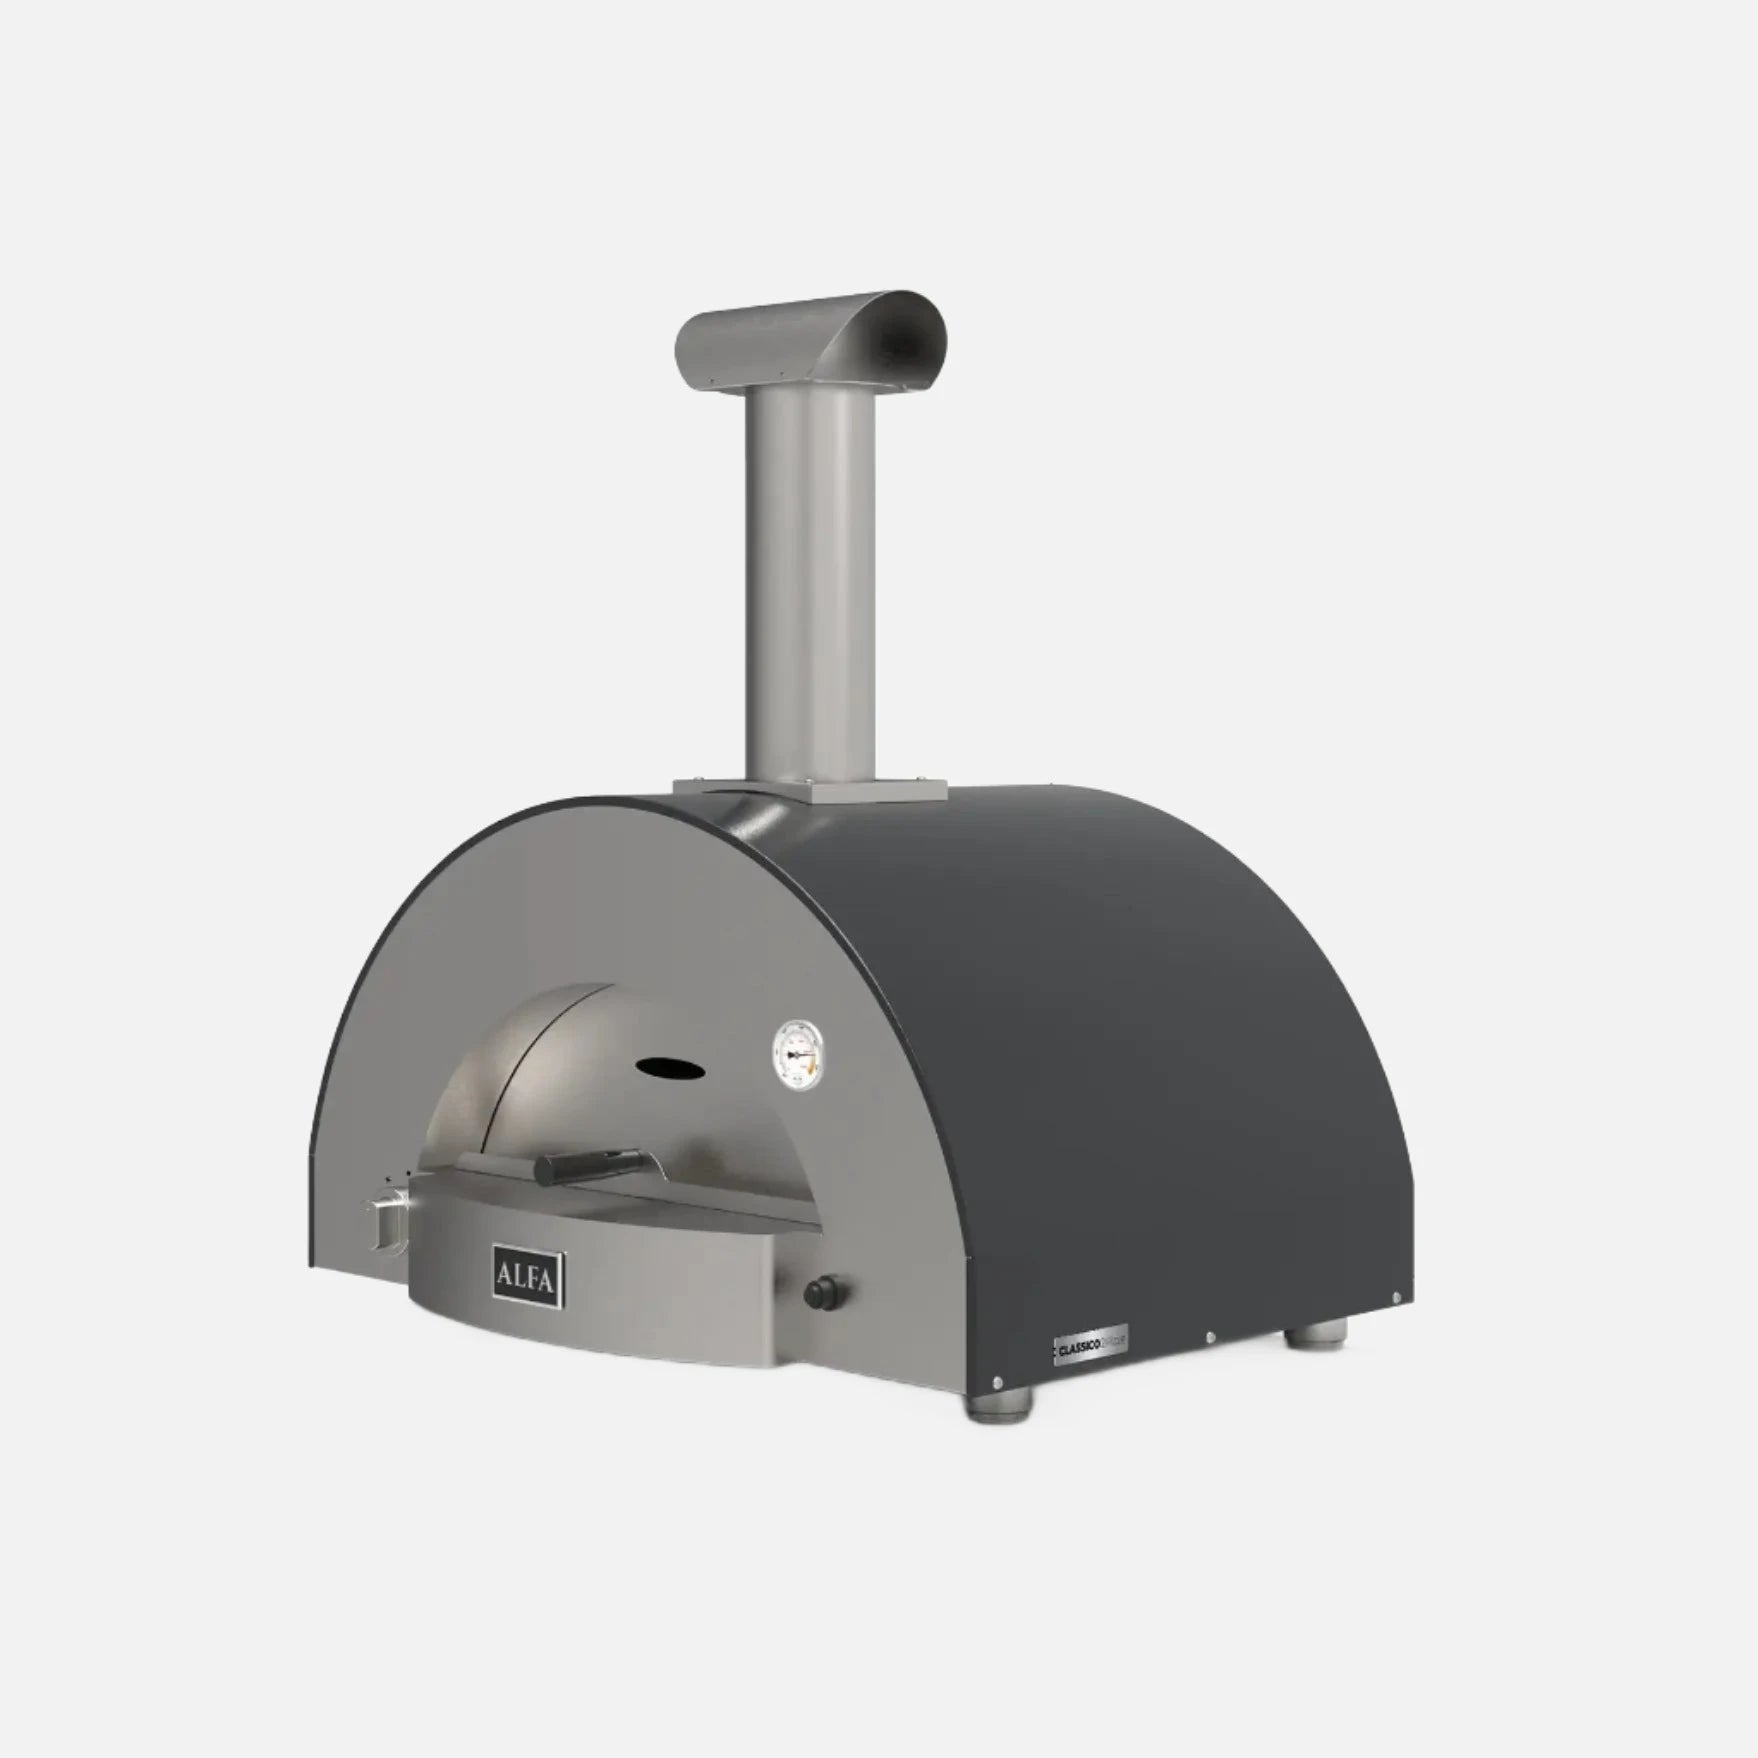 Gray Alfa Forni Moderno 2 Pizze Pizza Oven at an angle with gray background